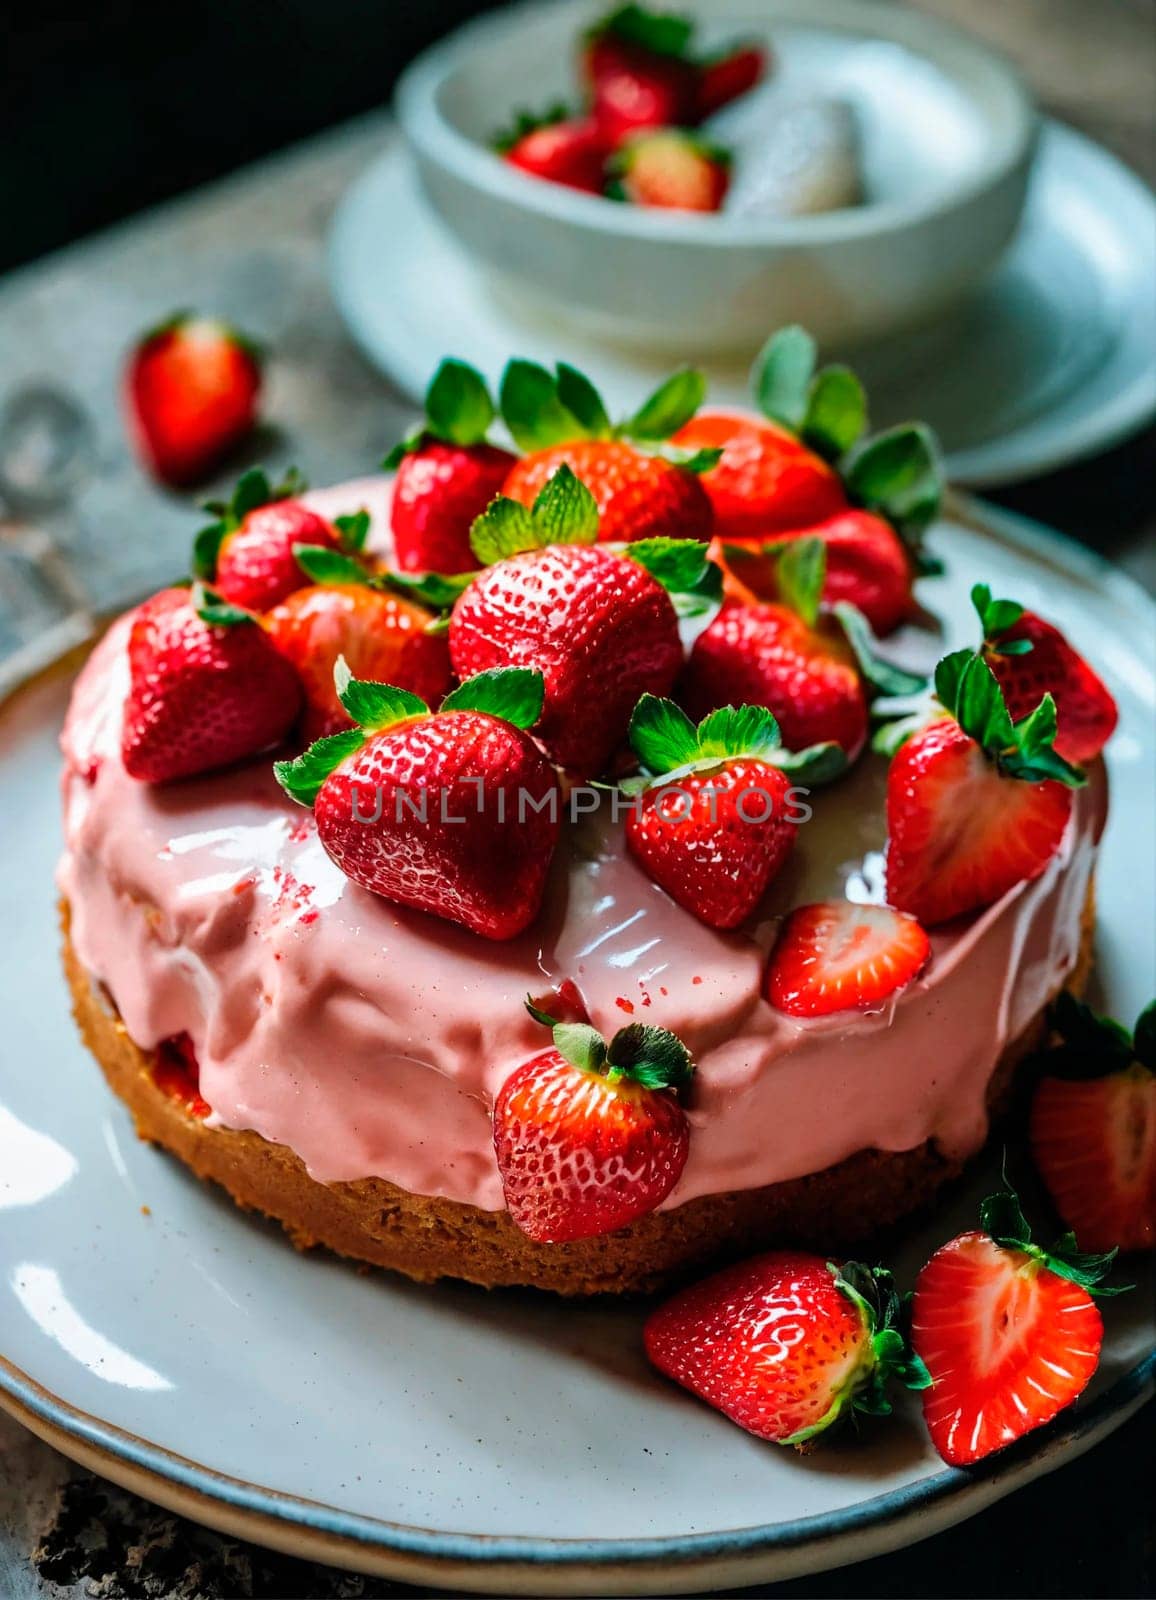 homemade strawberry cake on a plate. Selective focus. by yanadjana